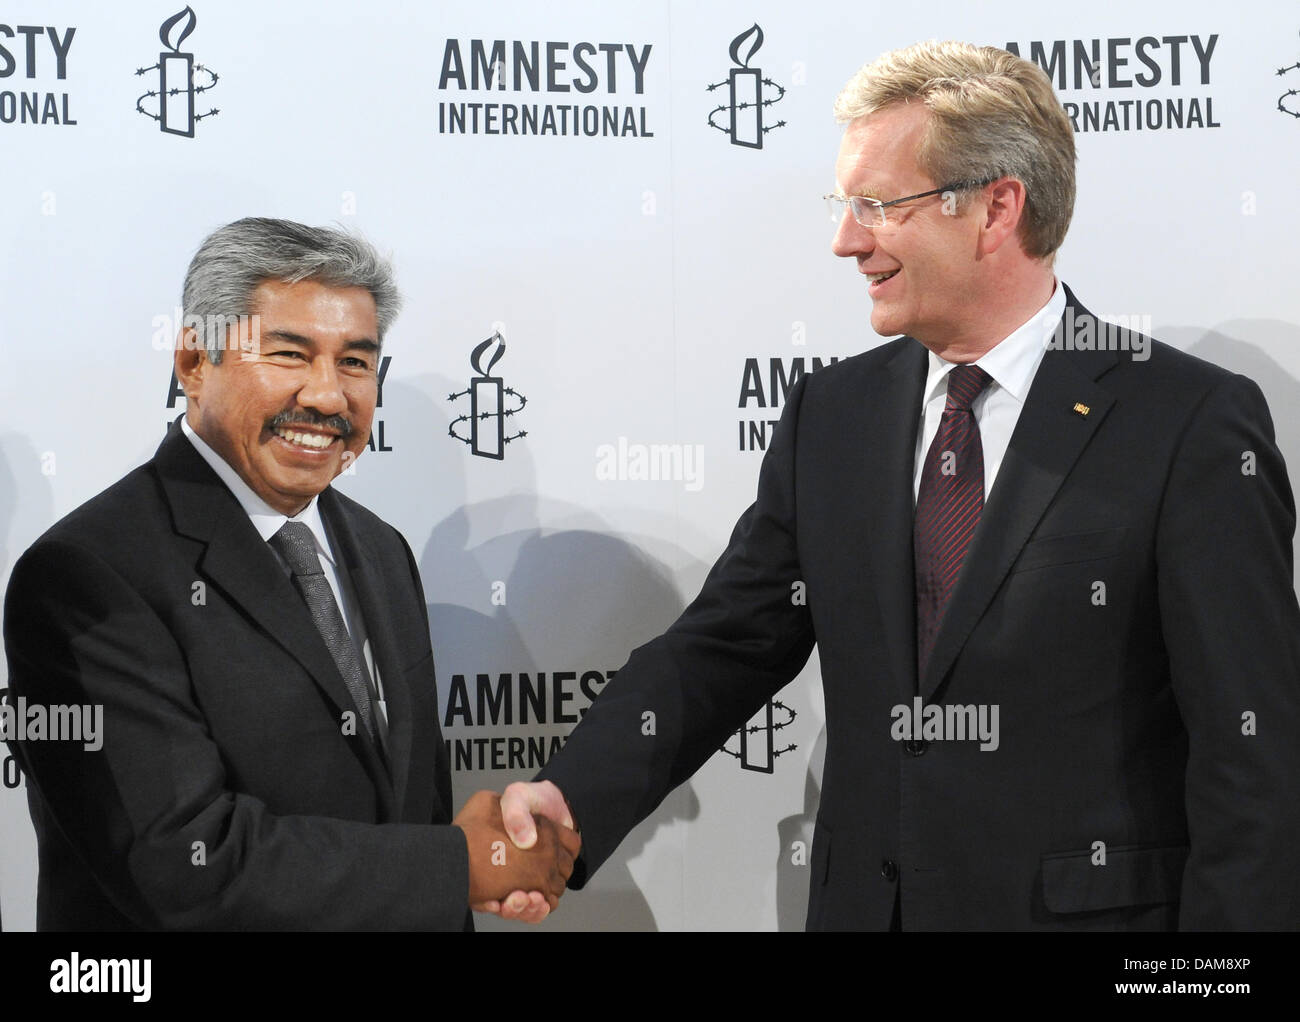 German President Christian Wulff (R) welcomes Abel Barrera Hernandez, founder of Mexican human rights organization Tlachinollan, at Haus der Kulturen der Welt in Berlin, Germany, 27 May 2011. Barrera has been awarded the Amnesty  International Human Rights Award for his work on human rights and justice issues for the indigenous people of his home state of Guerrero, Mexico. Photo: B Stock Photo